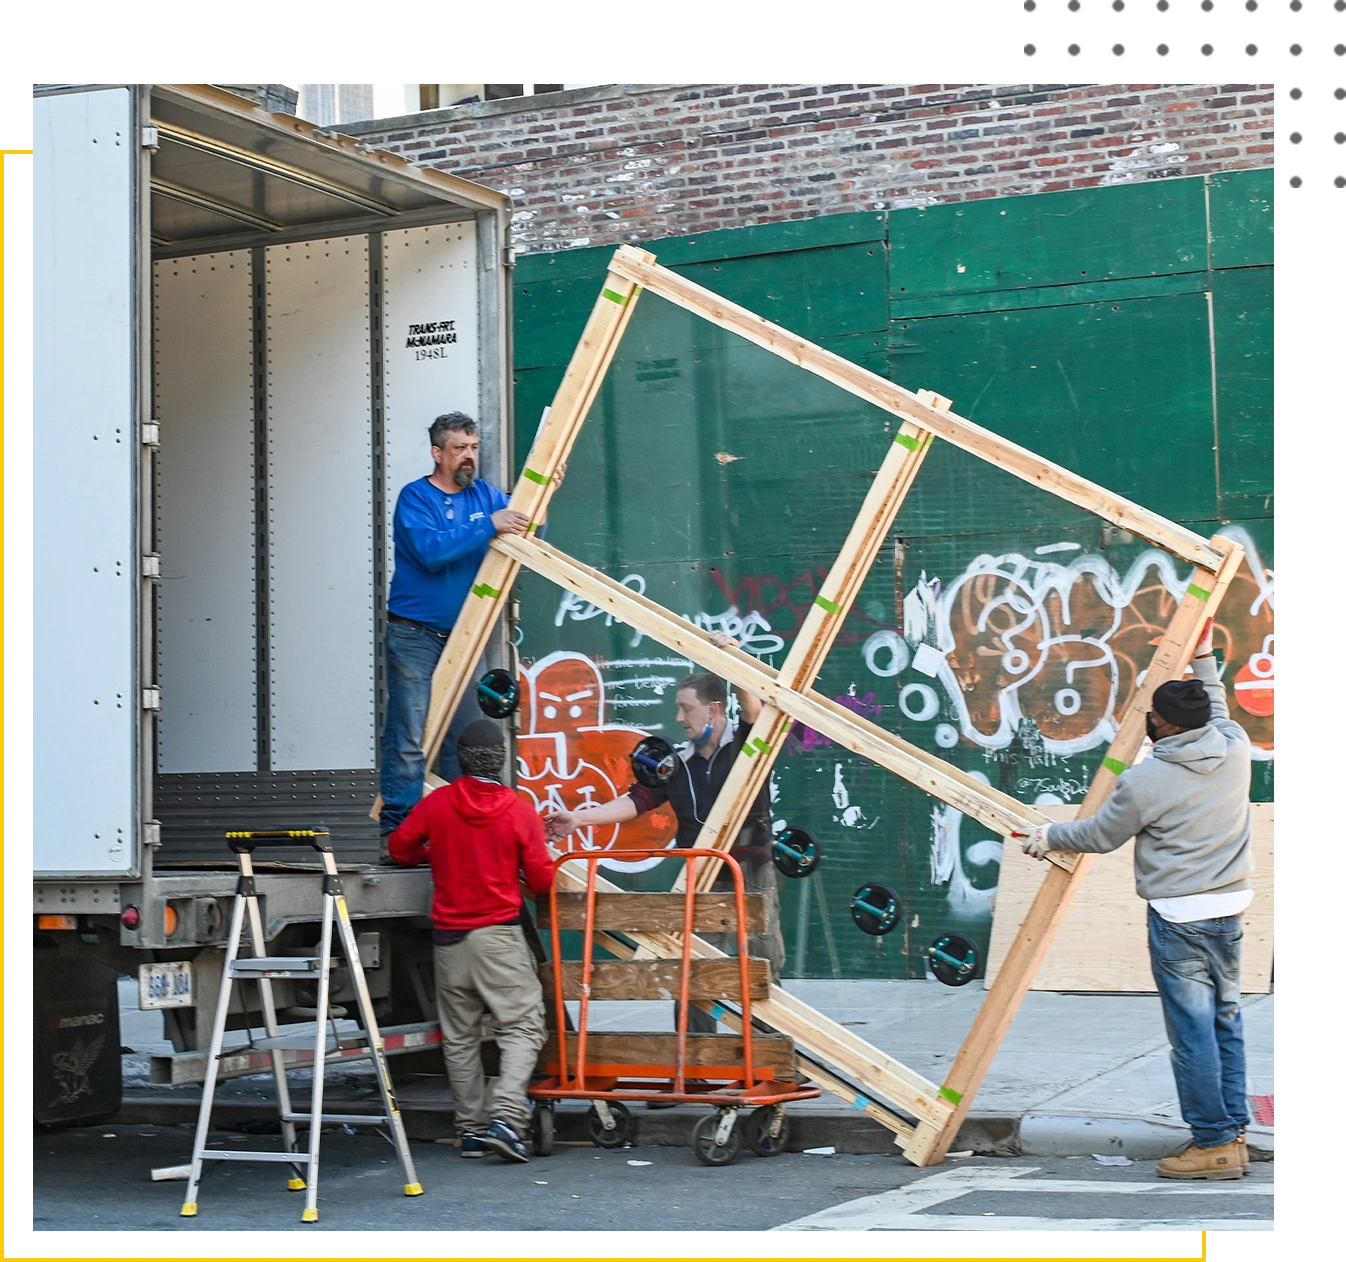 Three workers load a large, framed object into a truck parked by a graffiti-covered wall.